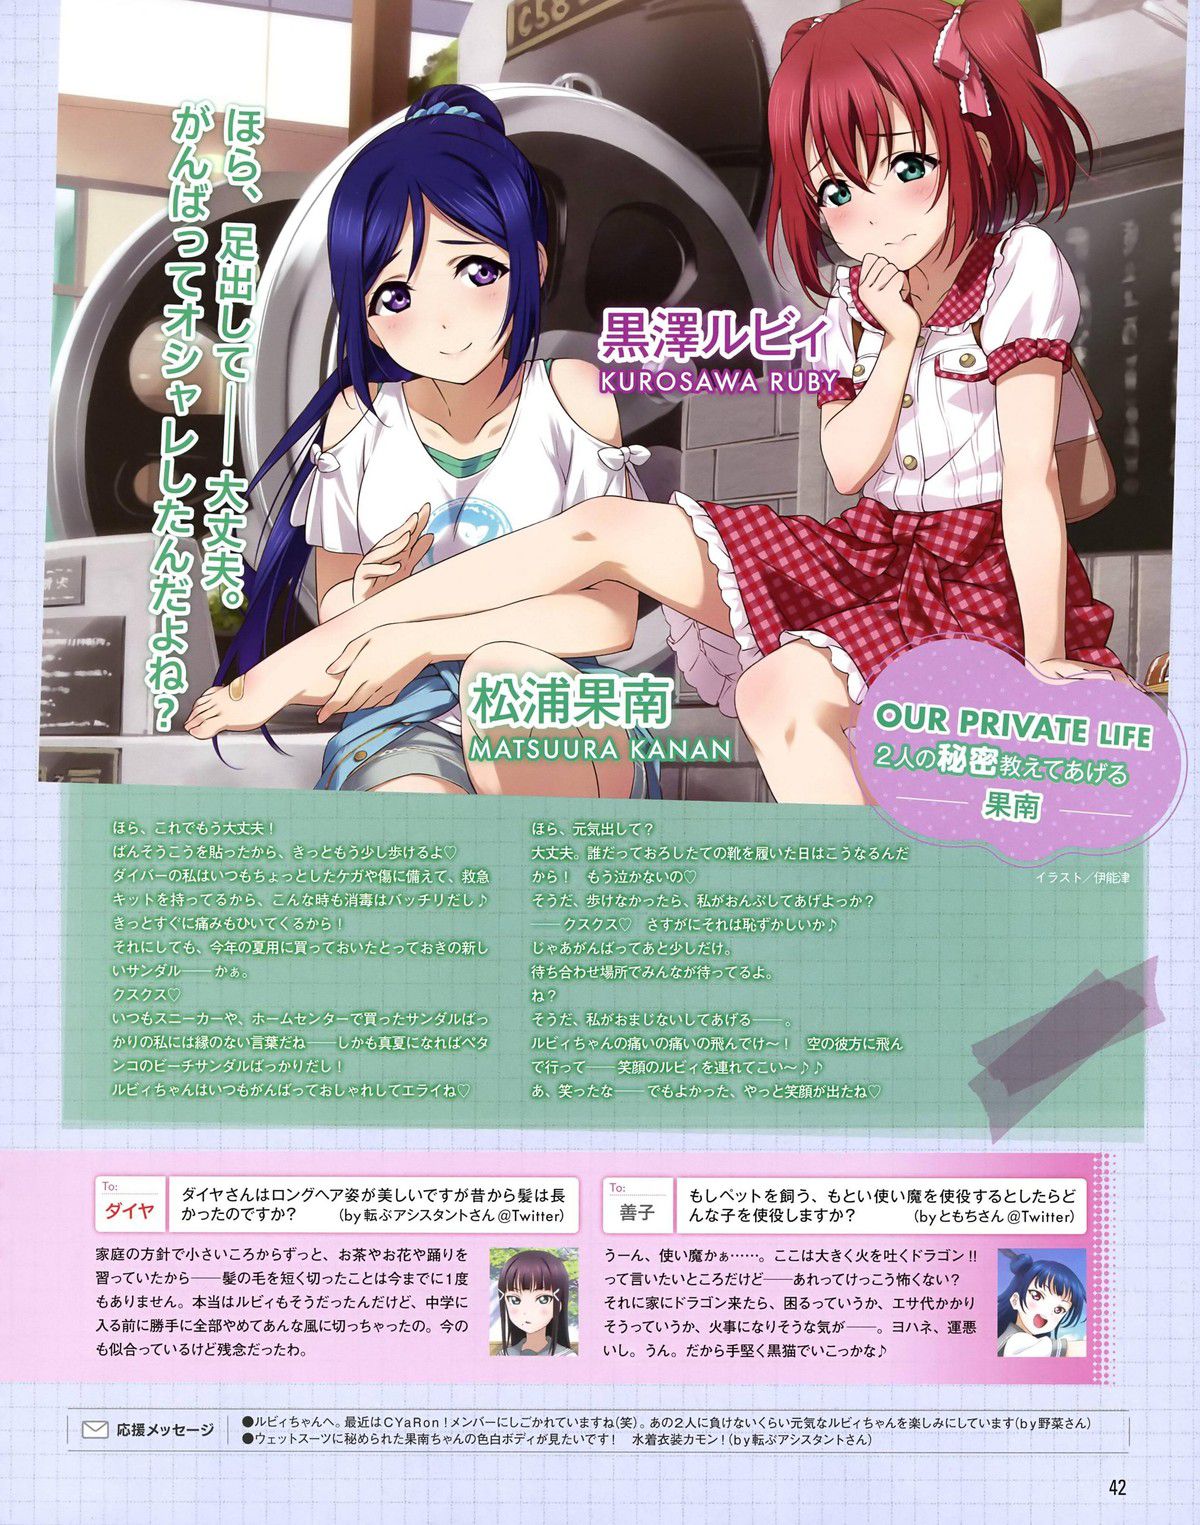 [Image] "love live! Sunshine ' to tell the truth 1-erotic not Matsuura of South's overwhelming body wwwwwwww 26